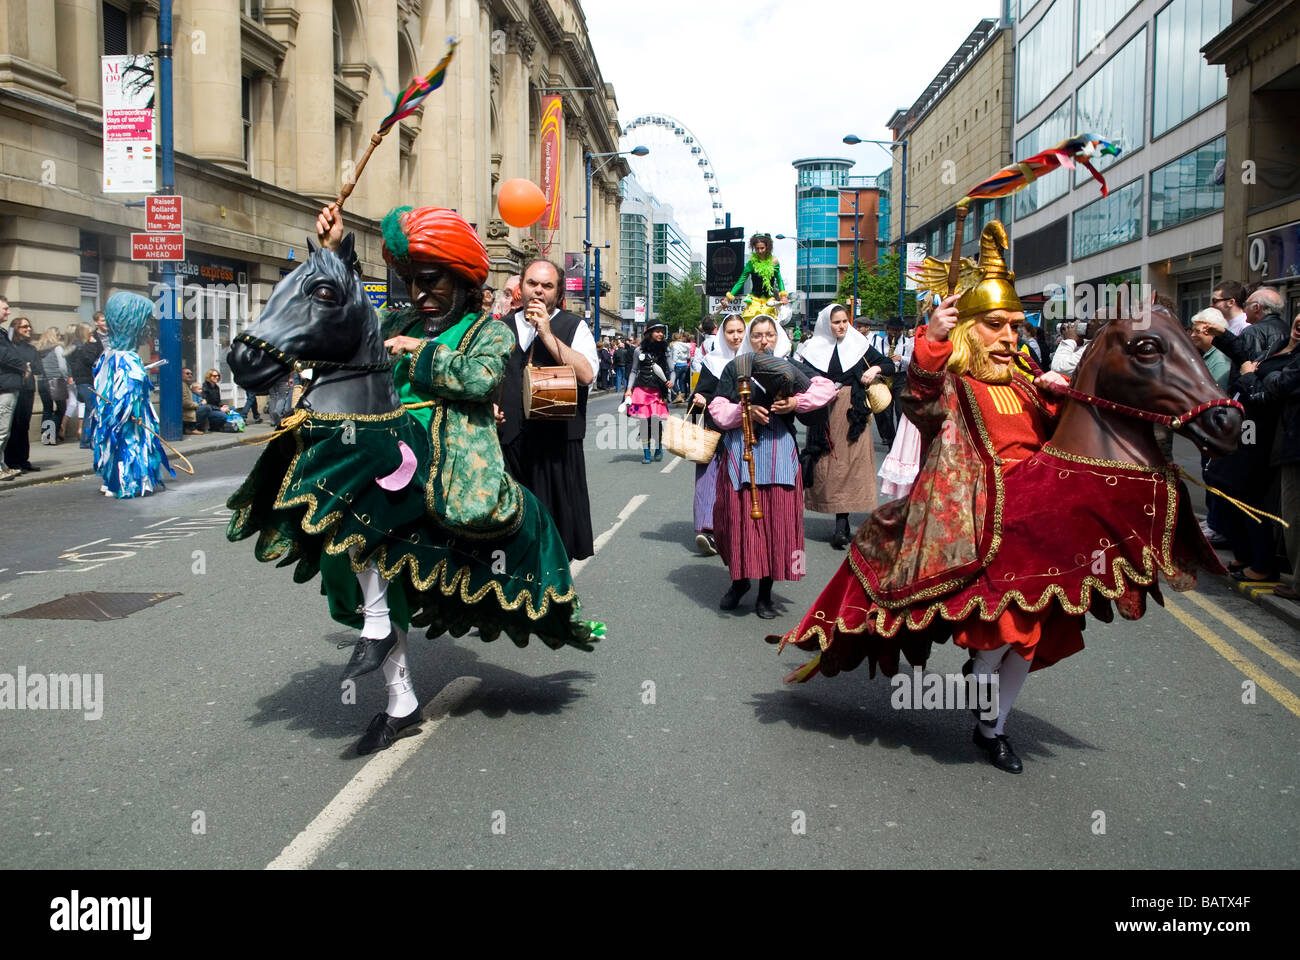 The Spanish festival parade in Manchester UK Stock Photo